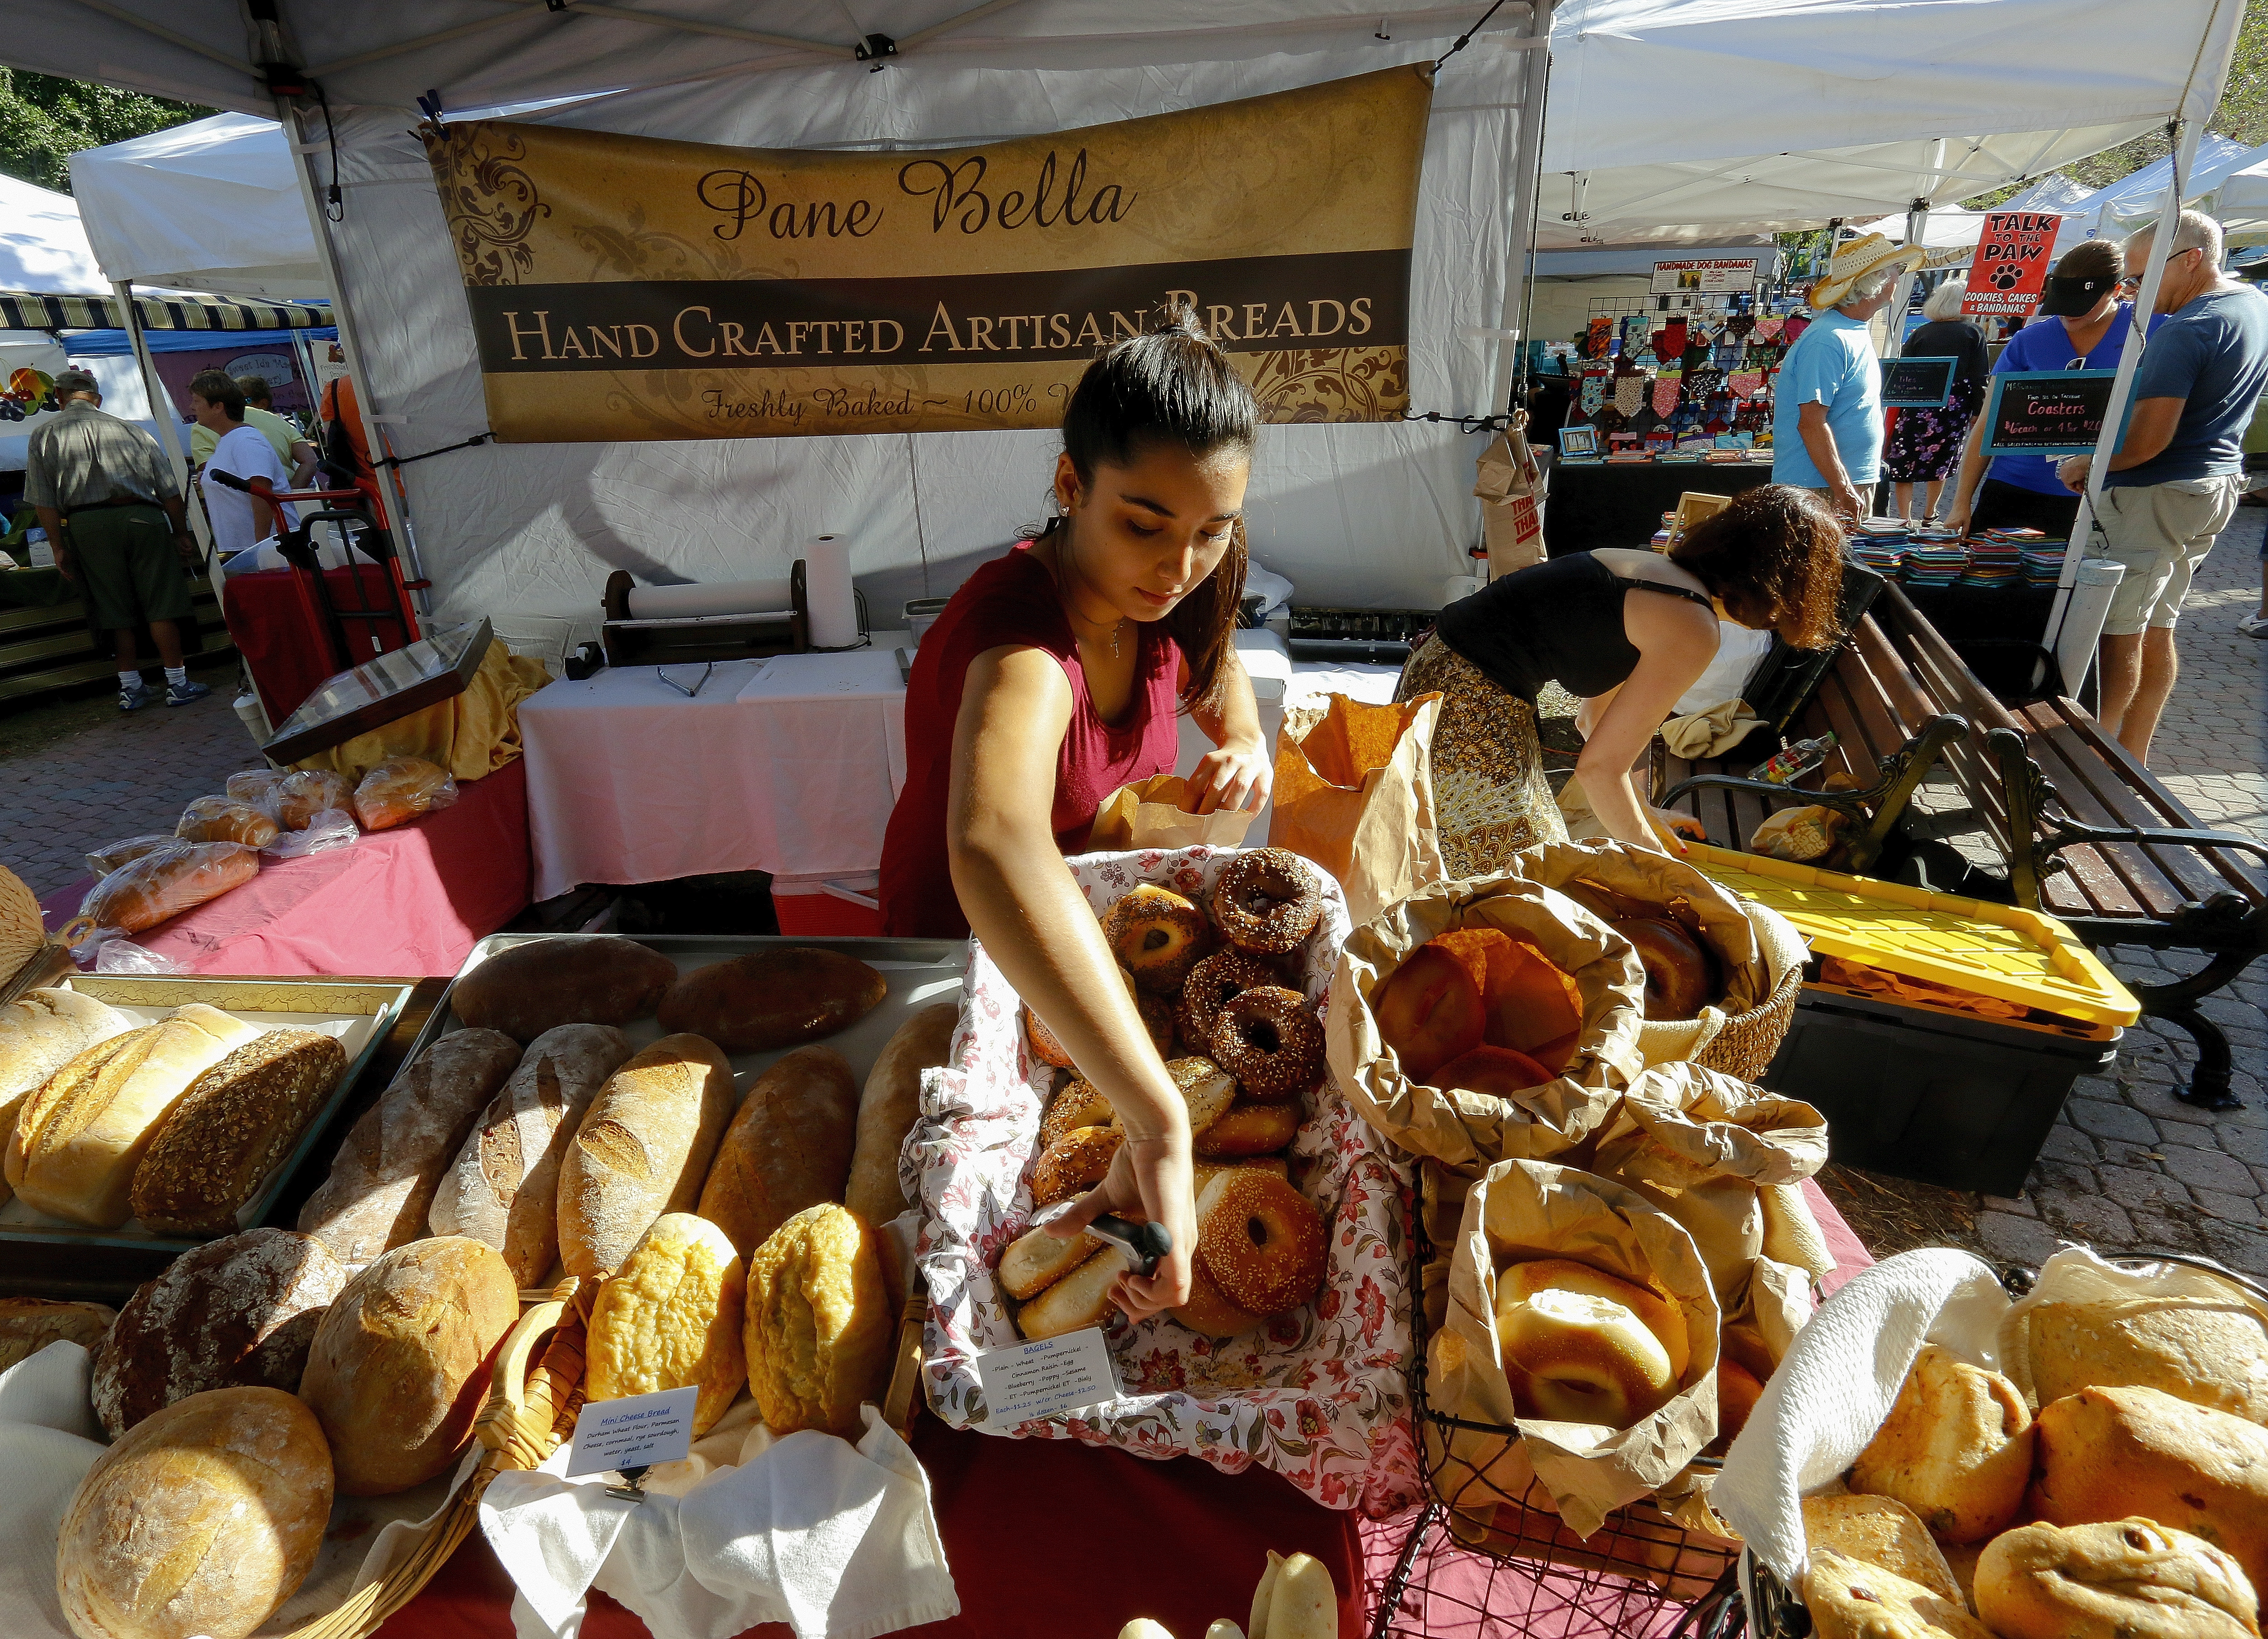 Therese Galante removes bagels from the loaves of bread on display by Pane Bella at the Tampa Bay Farmers' Market